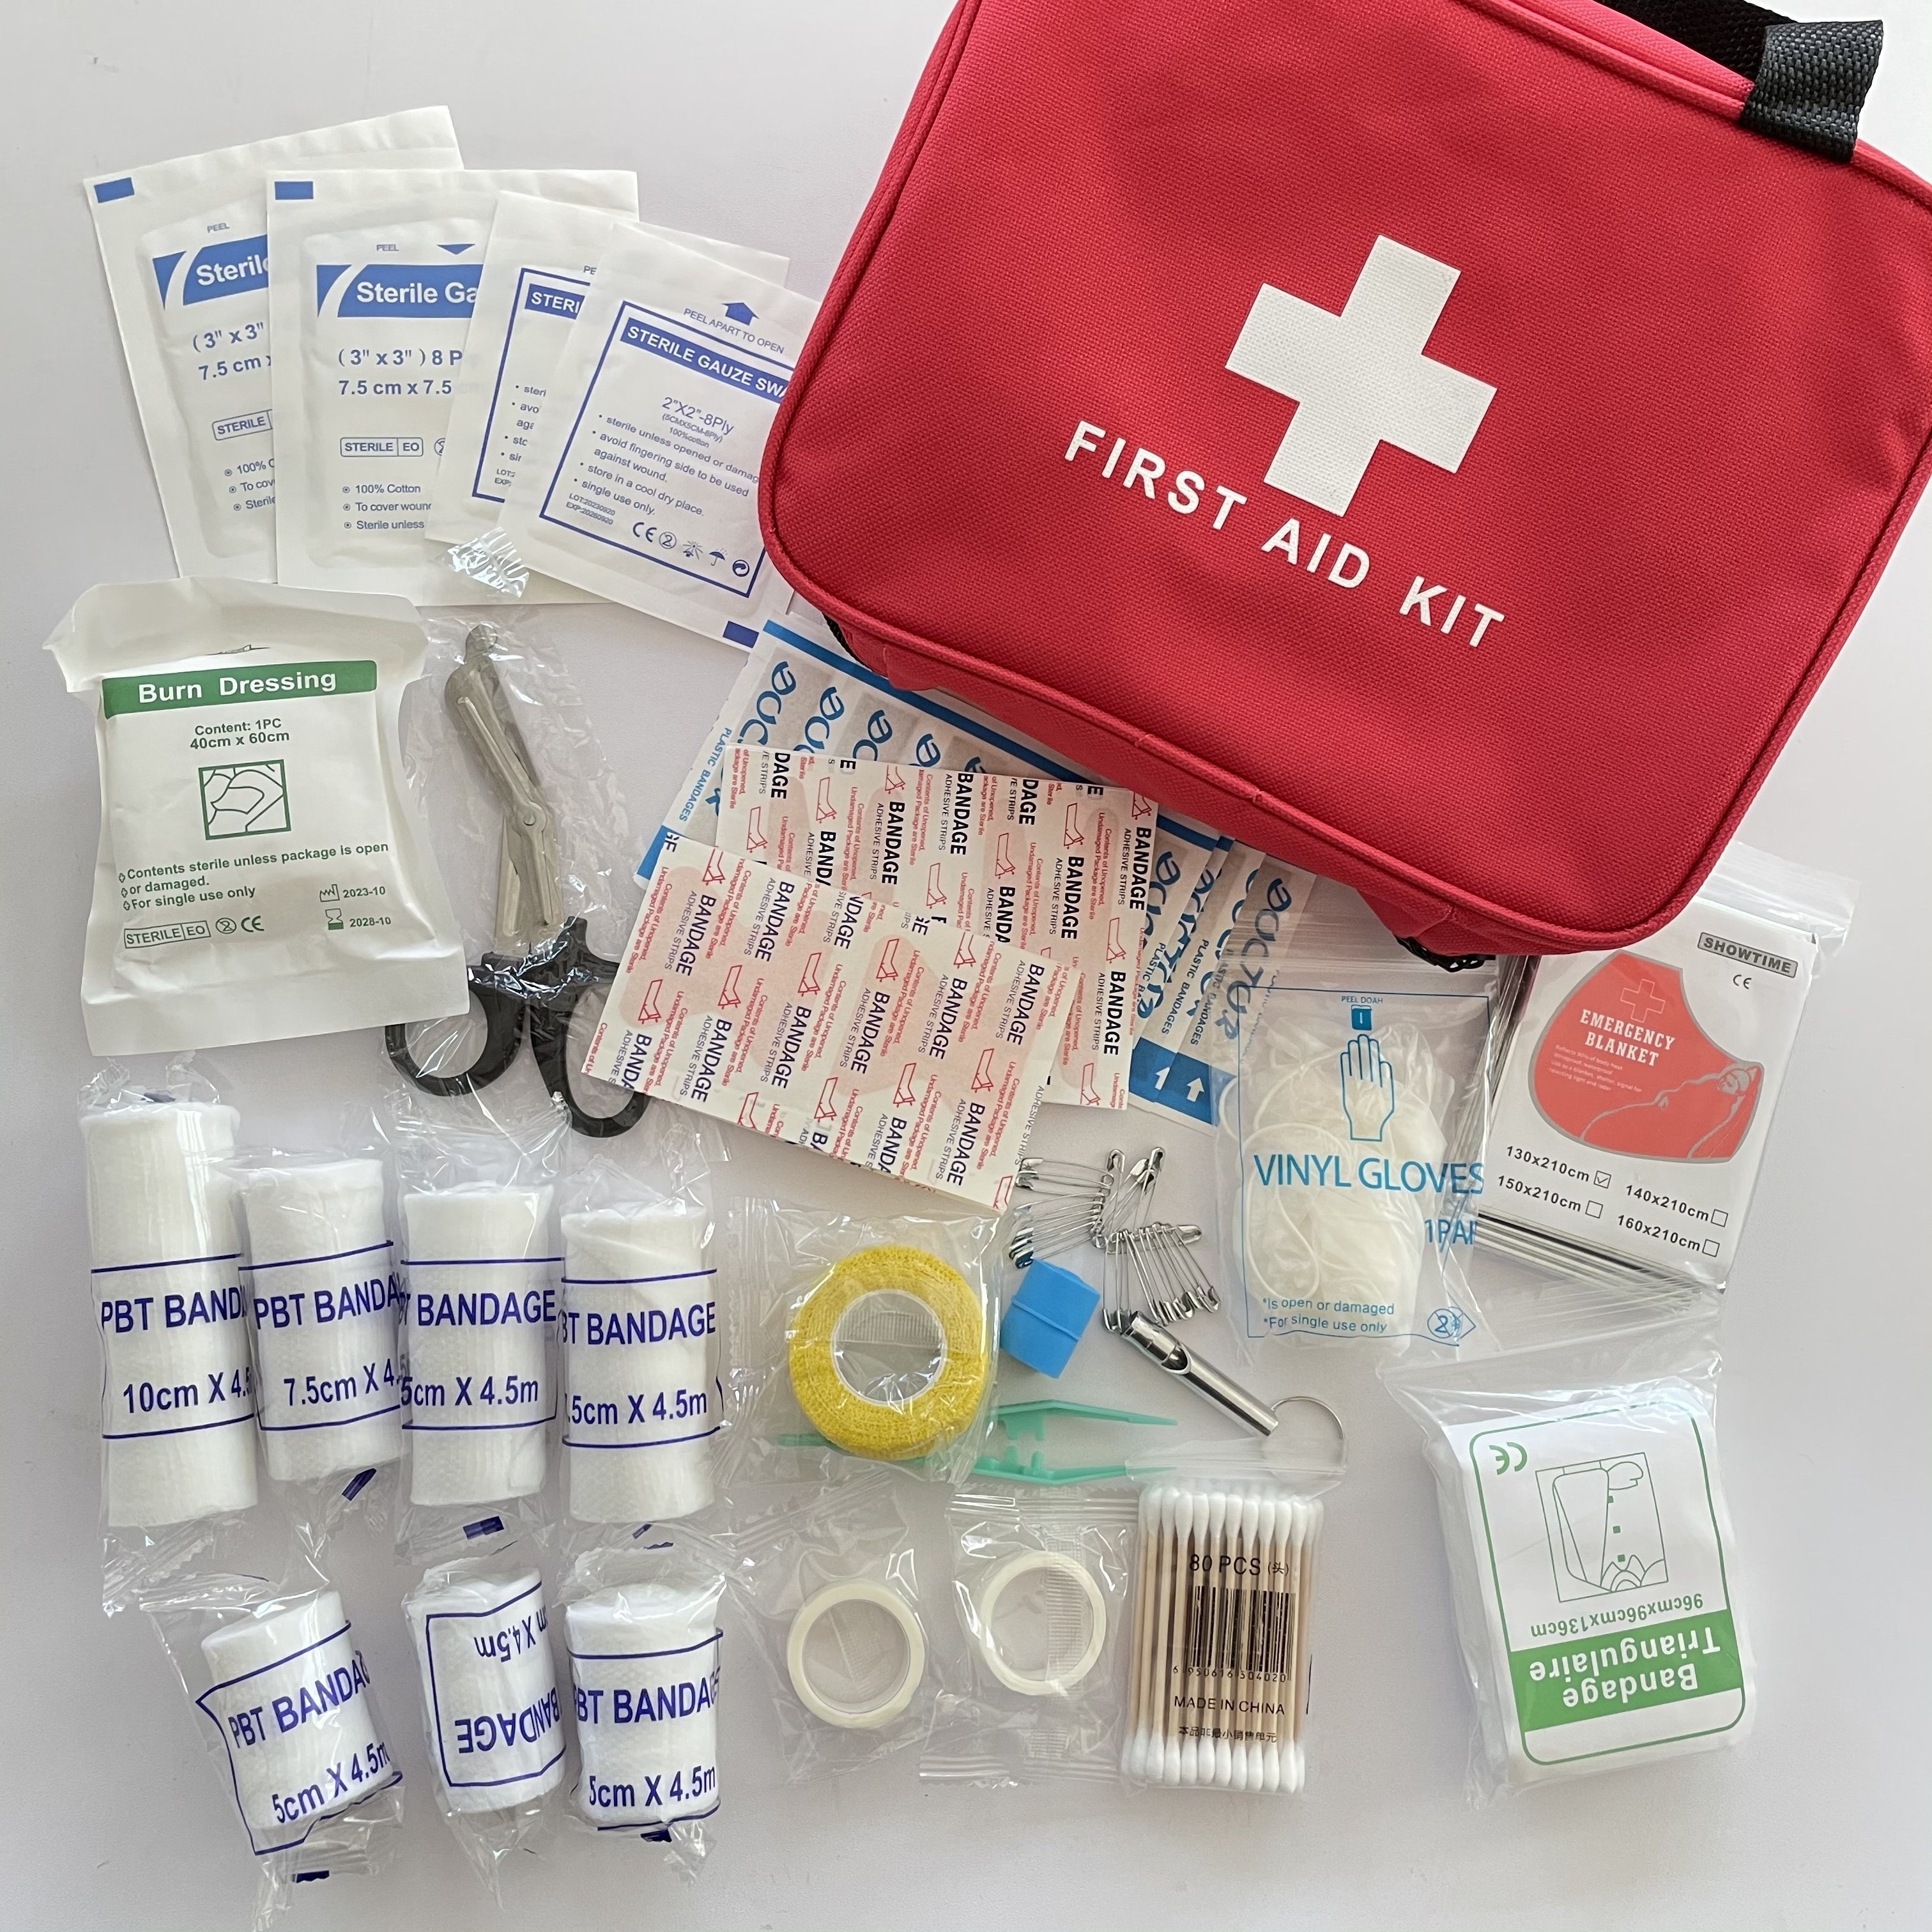 Thrive | First Aid Kit | 291 Piece Supply Kit | Hospital Grade Medical  Supplies for Emergency and Survival Situations | Car, Trucks, Camping,  Travel